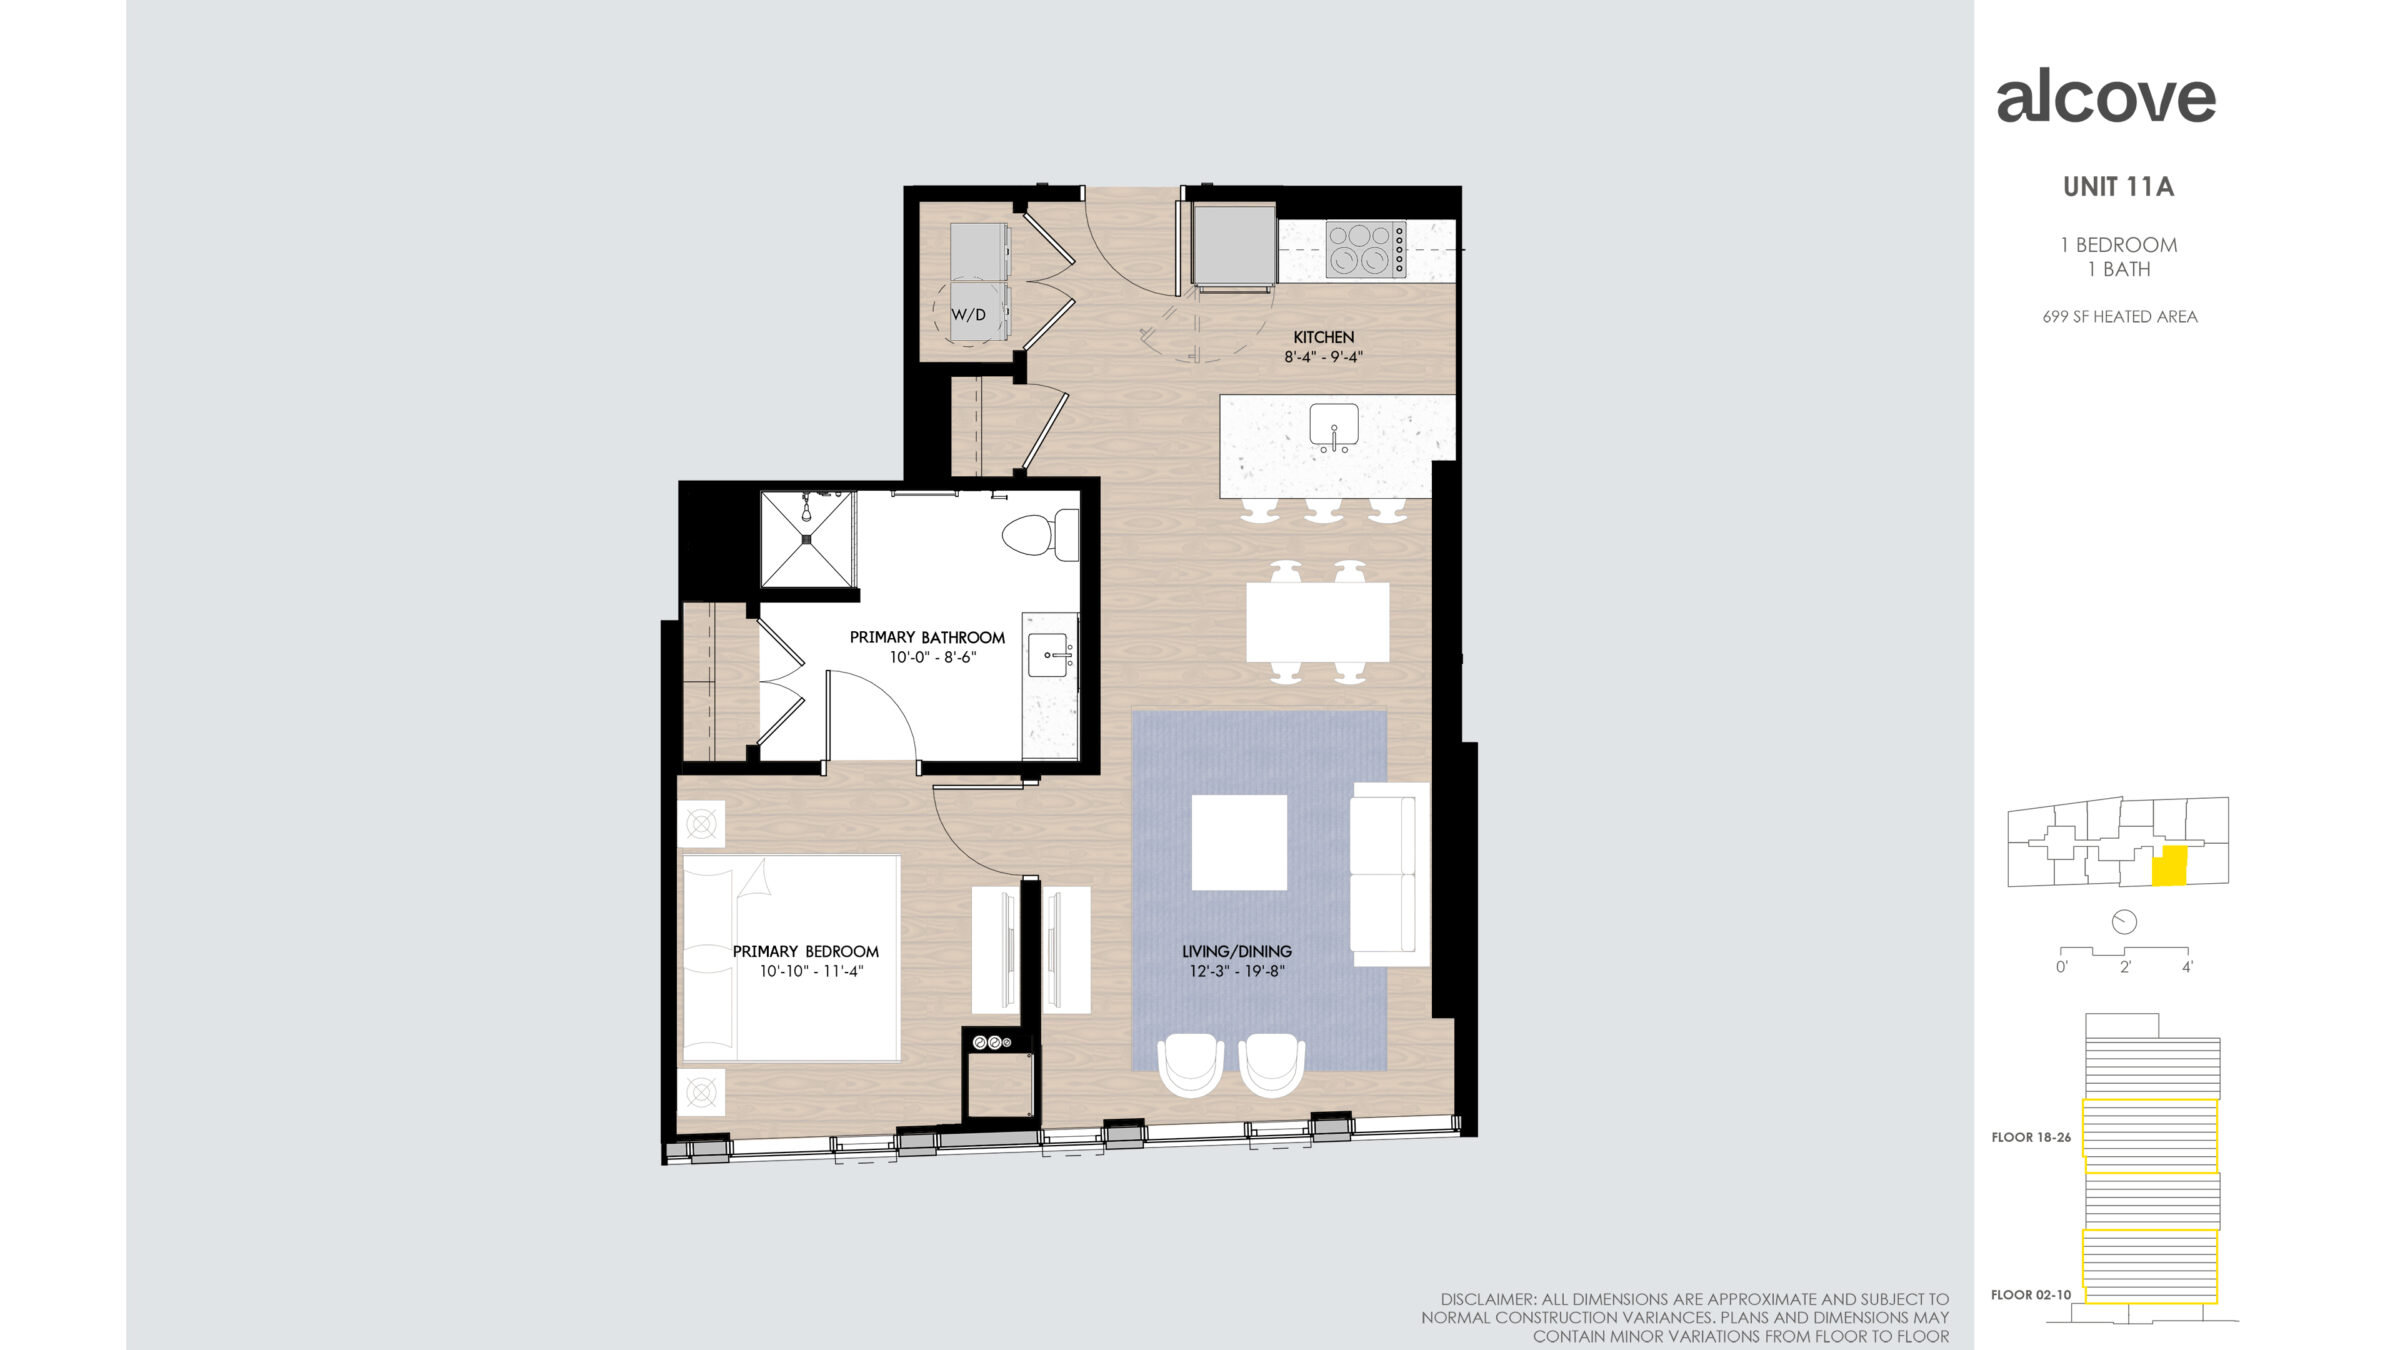 UNIT 11A 1 BEDROOM 1 BATH 699 SF HEATED AREA Floor 18-26 floor 02-10 Disclaimer: all dimensions are approximate and subject to normal construction variances. Plans and dimensions may contain minor variations from floor to floor.